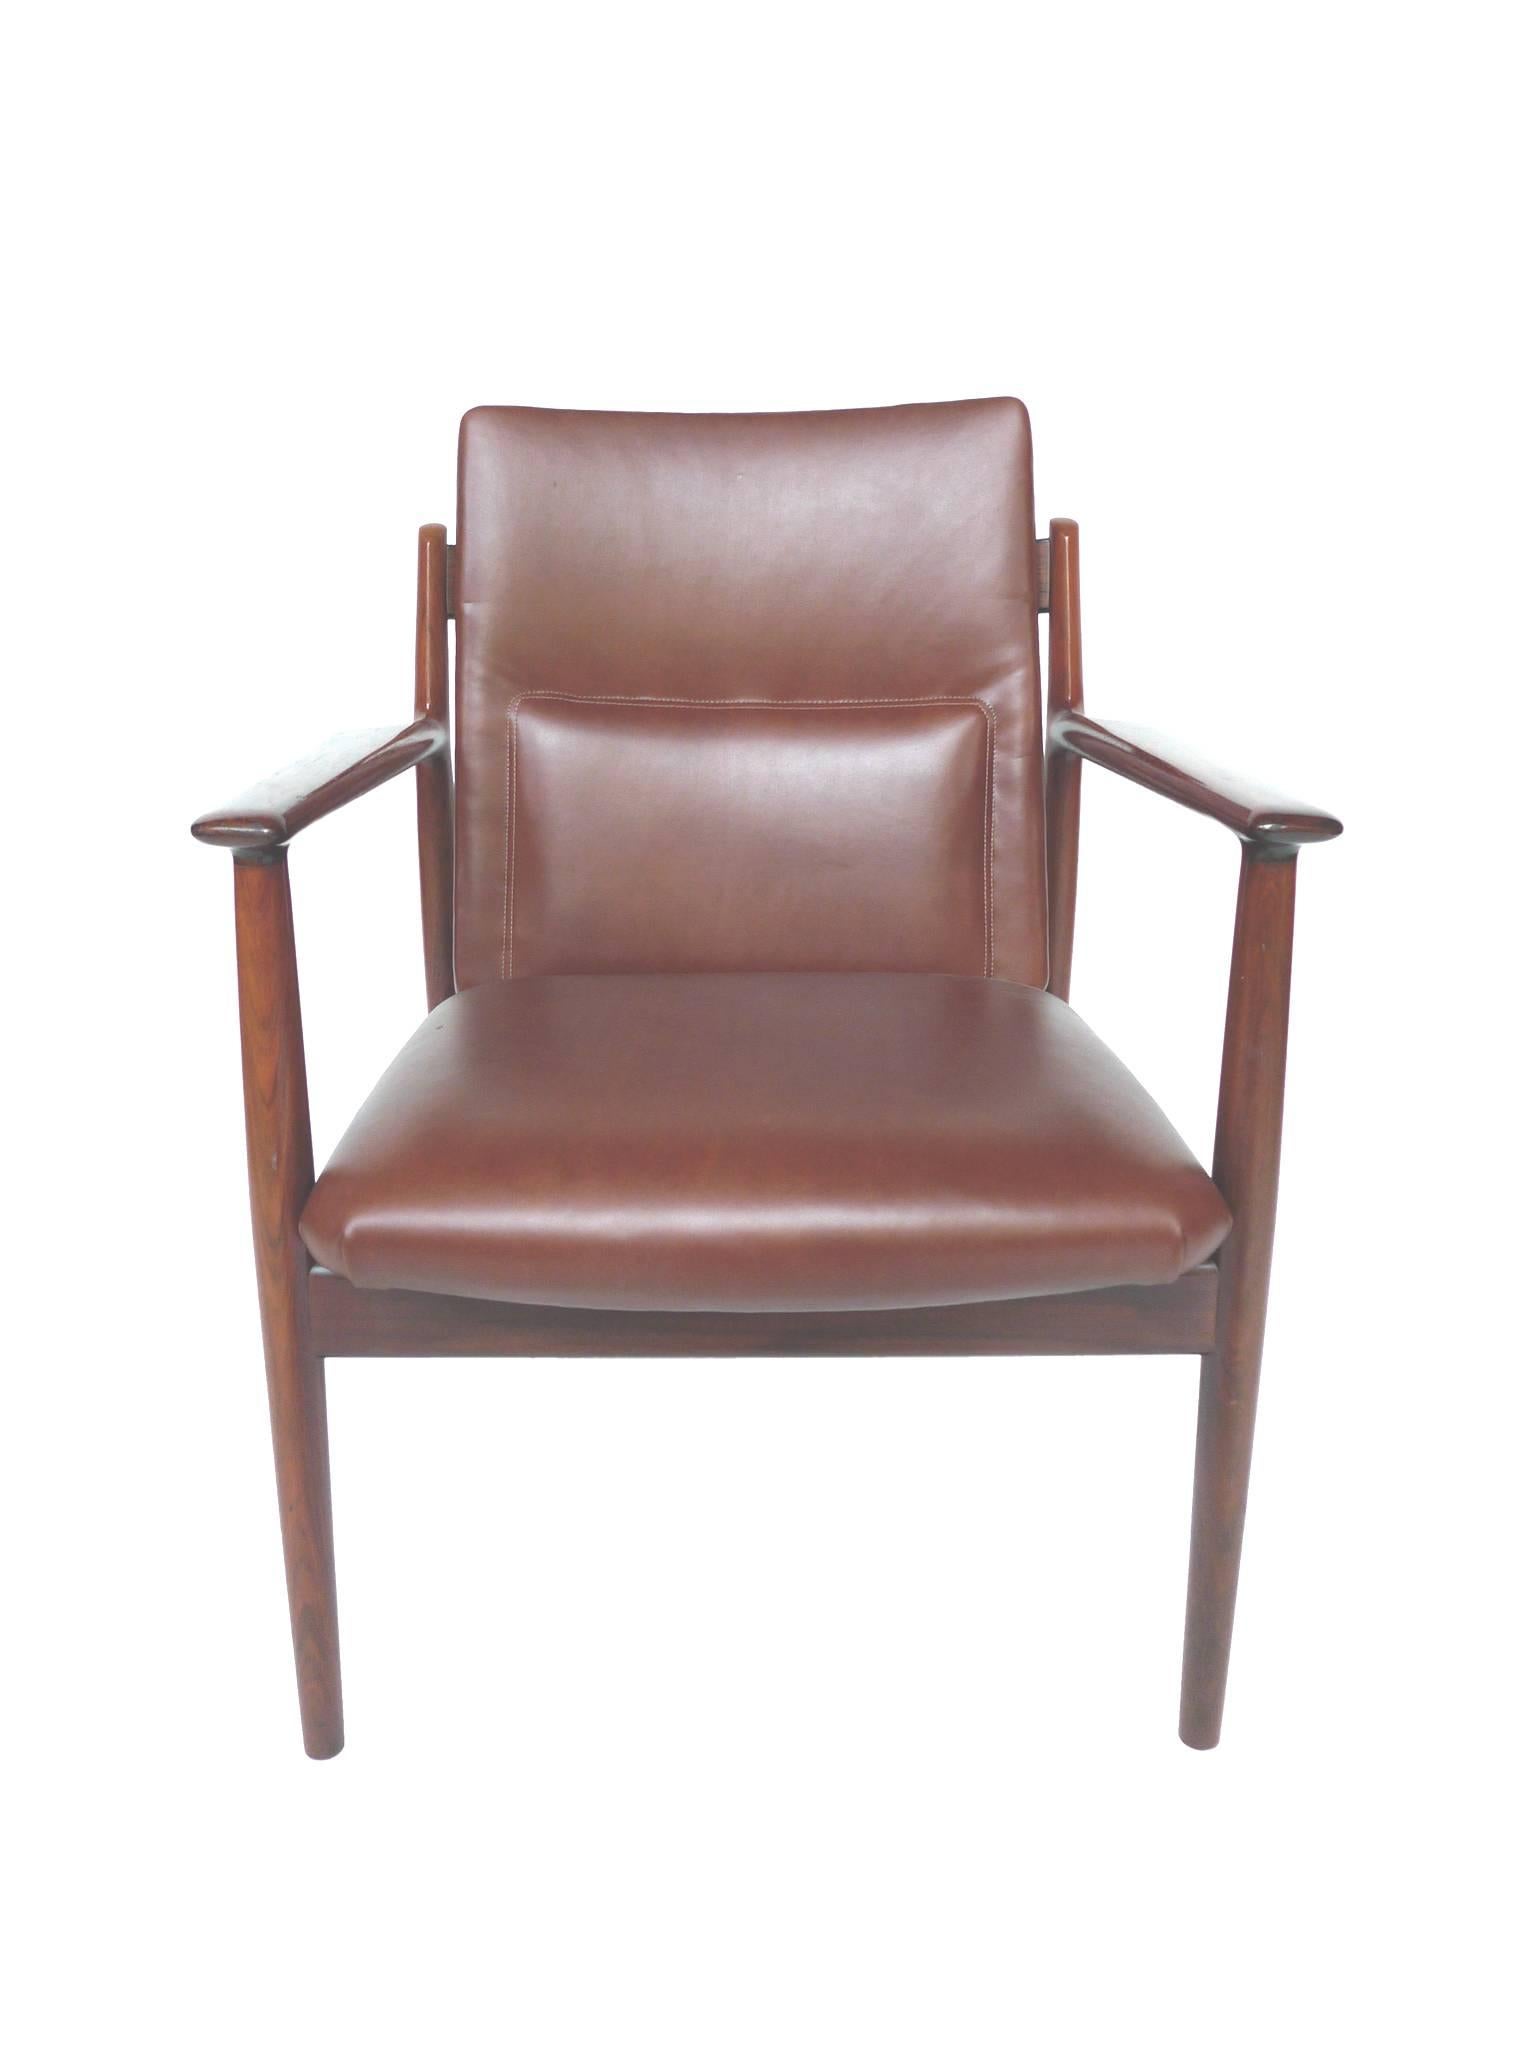 These Danish rosewood armchairs were designed by Arne Vodder and manufactured by Sibast Furniture. They are refinished and reupholstered in a maroon vinyl to match the deep red-brown of the rosewood. Vodder's design is one of clean lines. The chairs